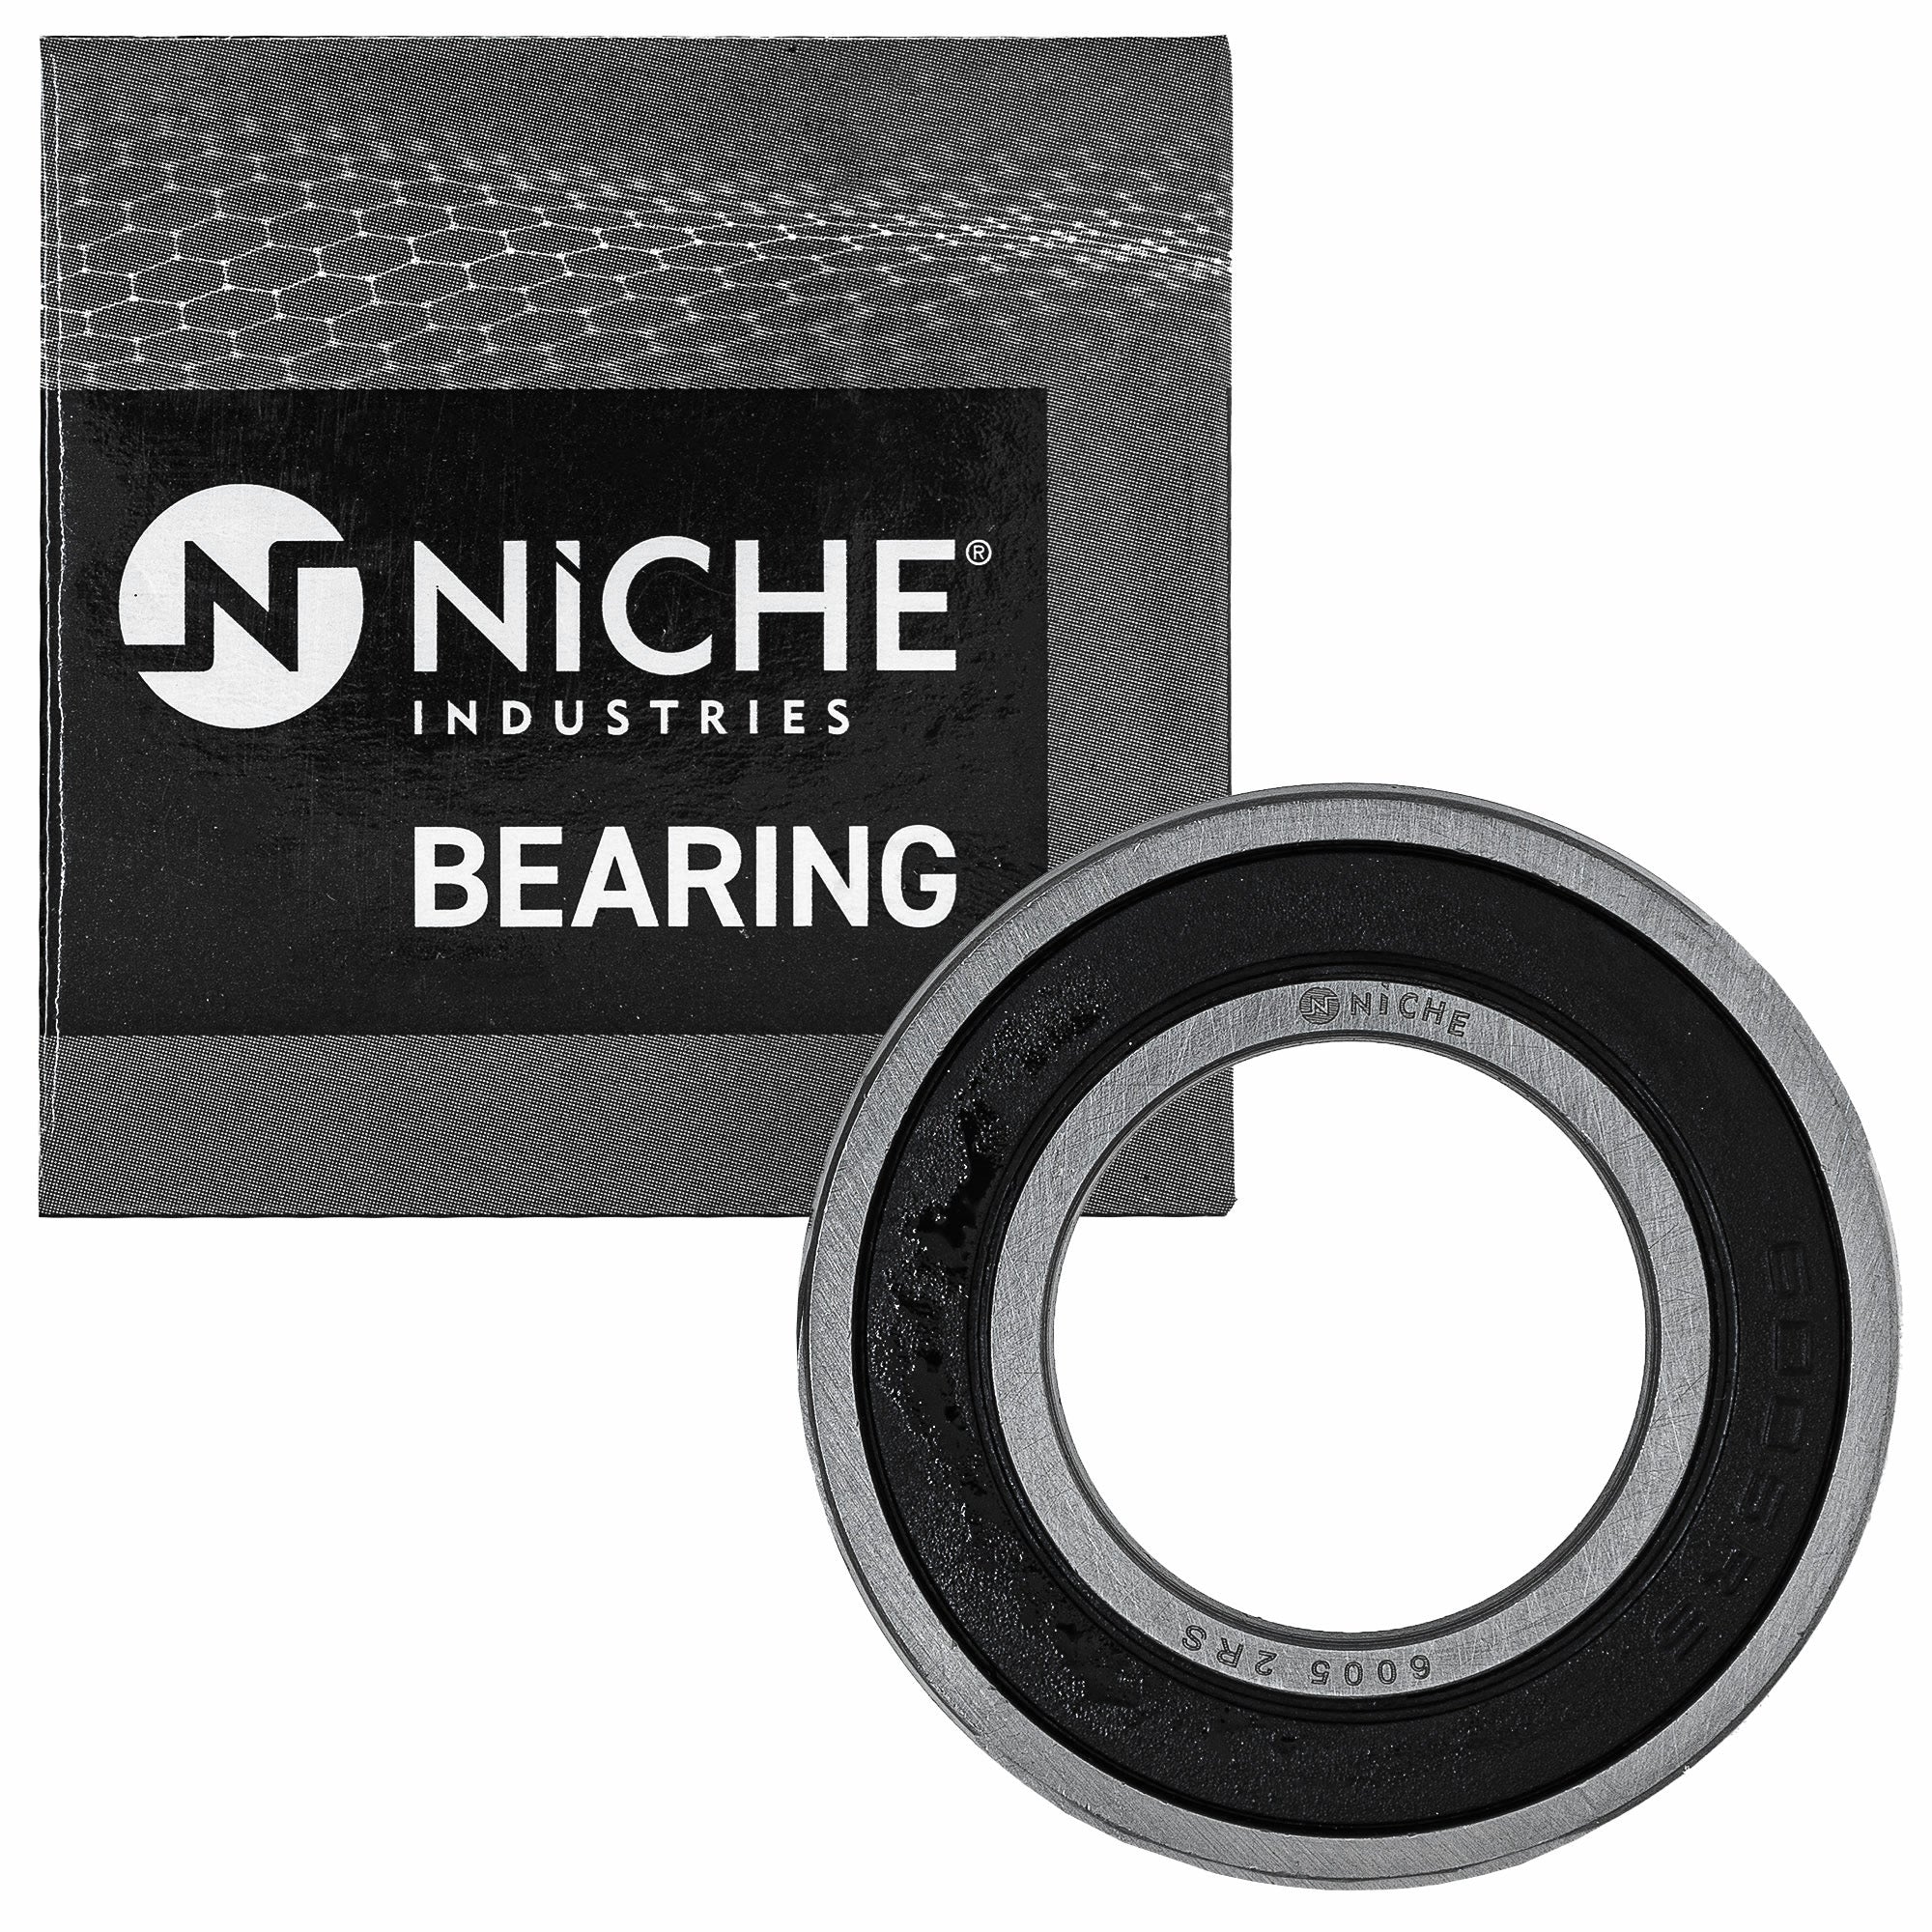 NICHE MK1009164 Wheel Bearing Seal Kit for zOTHER Xtrainer XDiavel